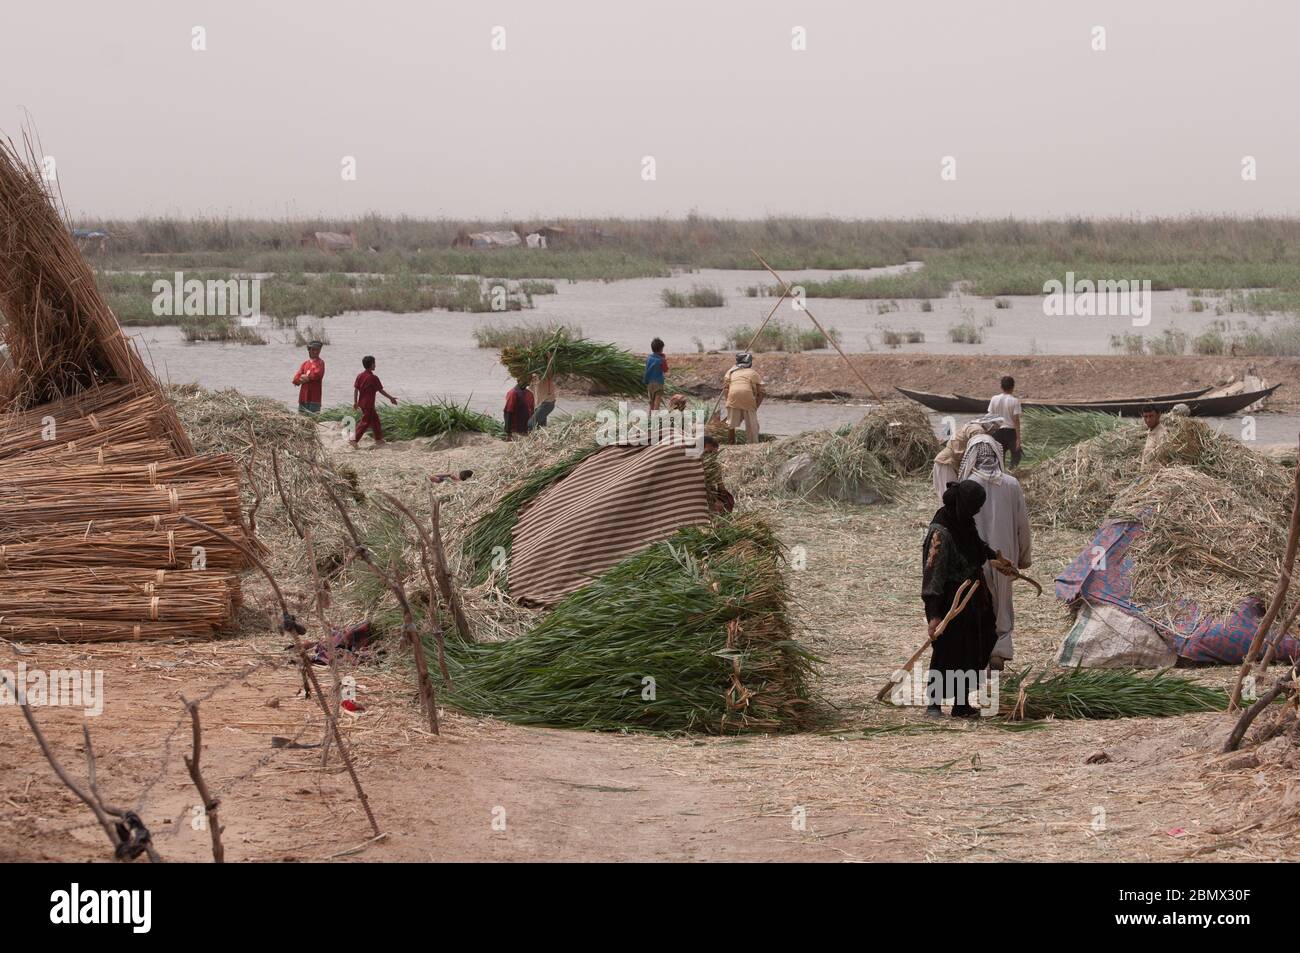 A Marsh Arab Village near Al-Chibayish in Southern Iraq.  Reeds are being processed after being cut in the marshes.  The freshly cut reeds (centre) are de-leaved and then dried in bundles (Left) for use in construction of traditional reed buildings such as a Mudhif Stock Photo